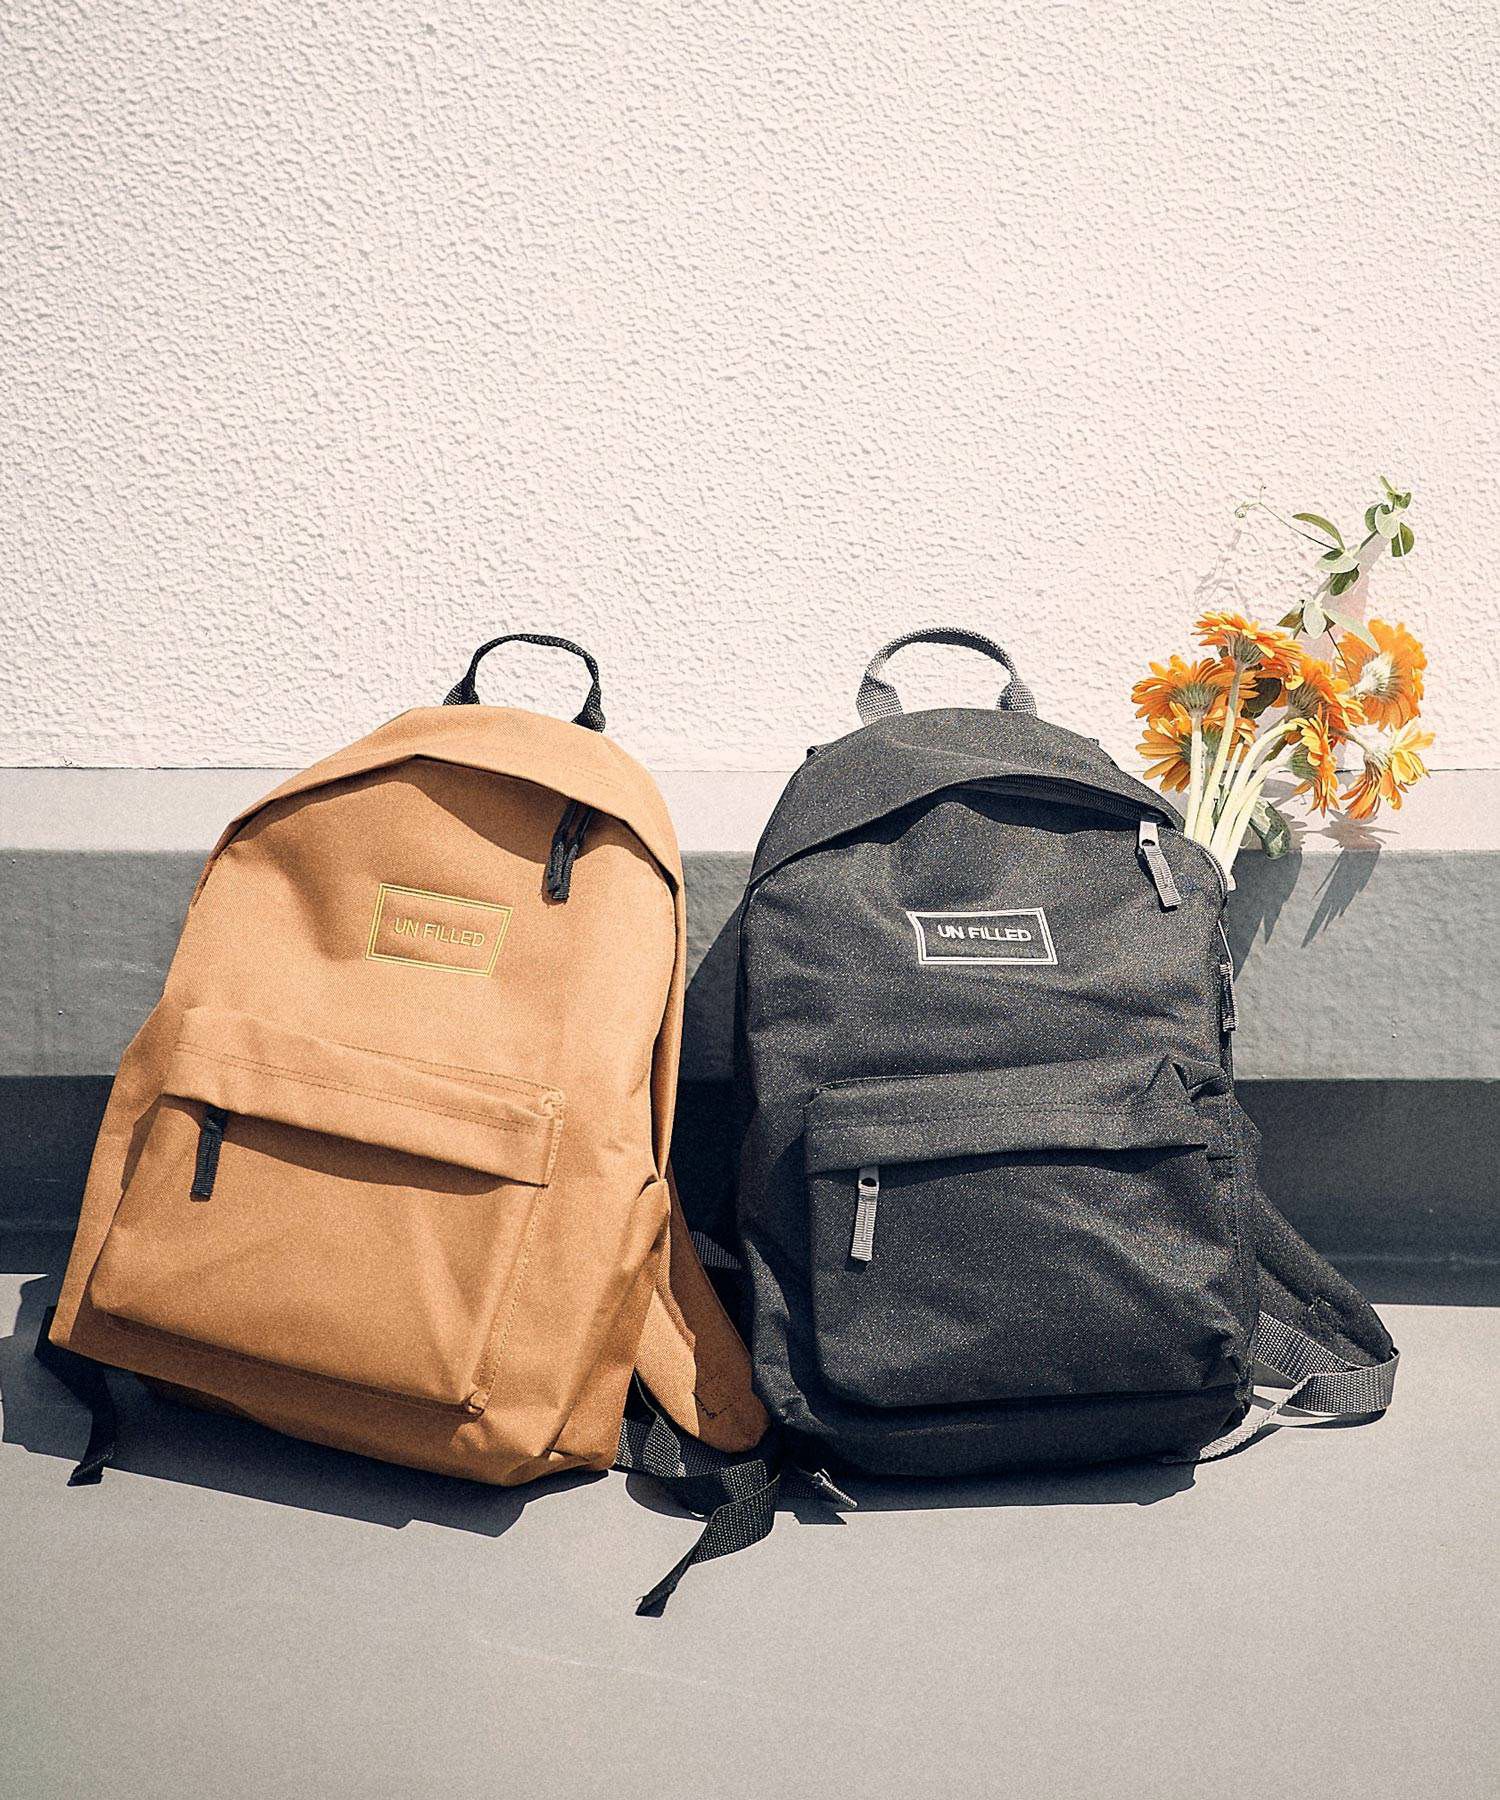 Un Filled アンフィルド Box Logo One Point Stitch Backpack バックパック Sduf 025 Cambio カンビオ